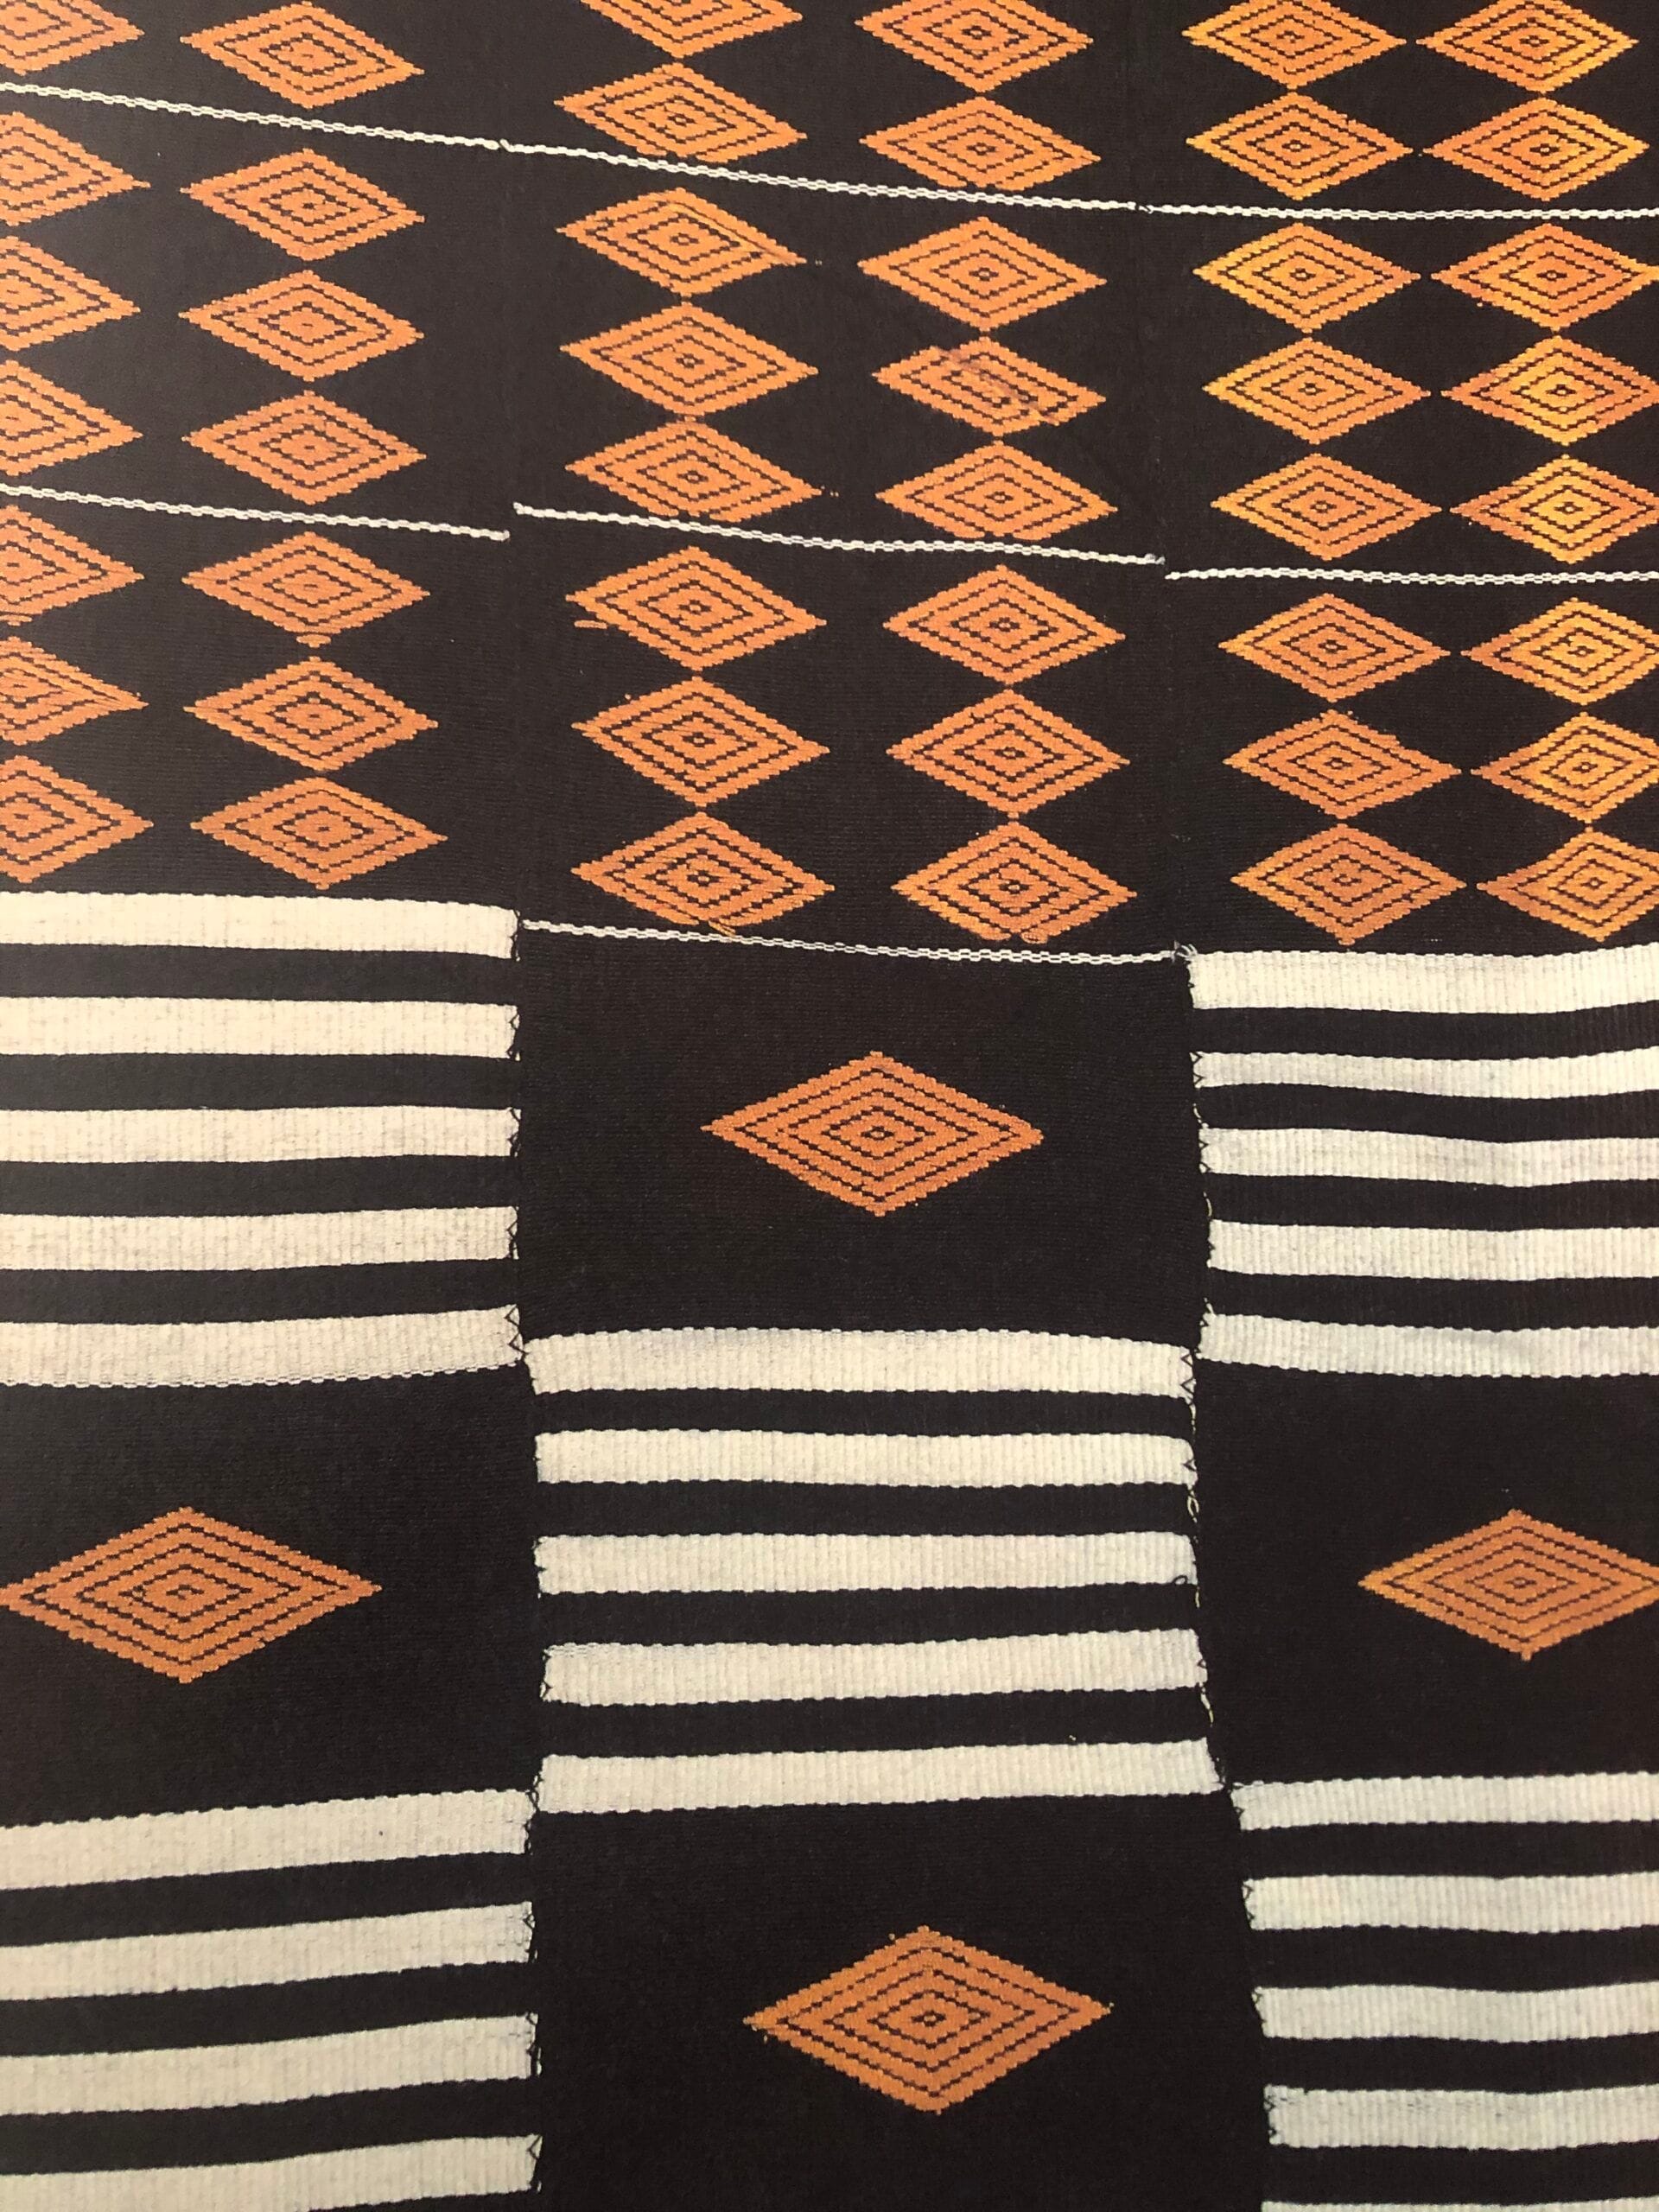 THE MATERIALS & PROCESSES RELATED TO THE CULTURAL TEXTILES OF AFRICA